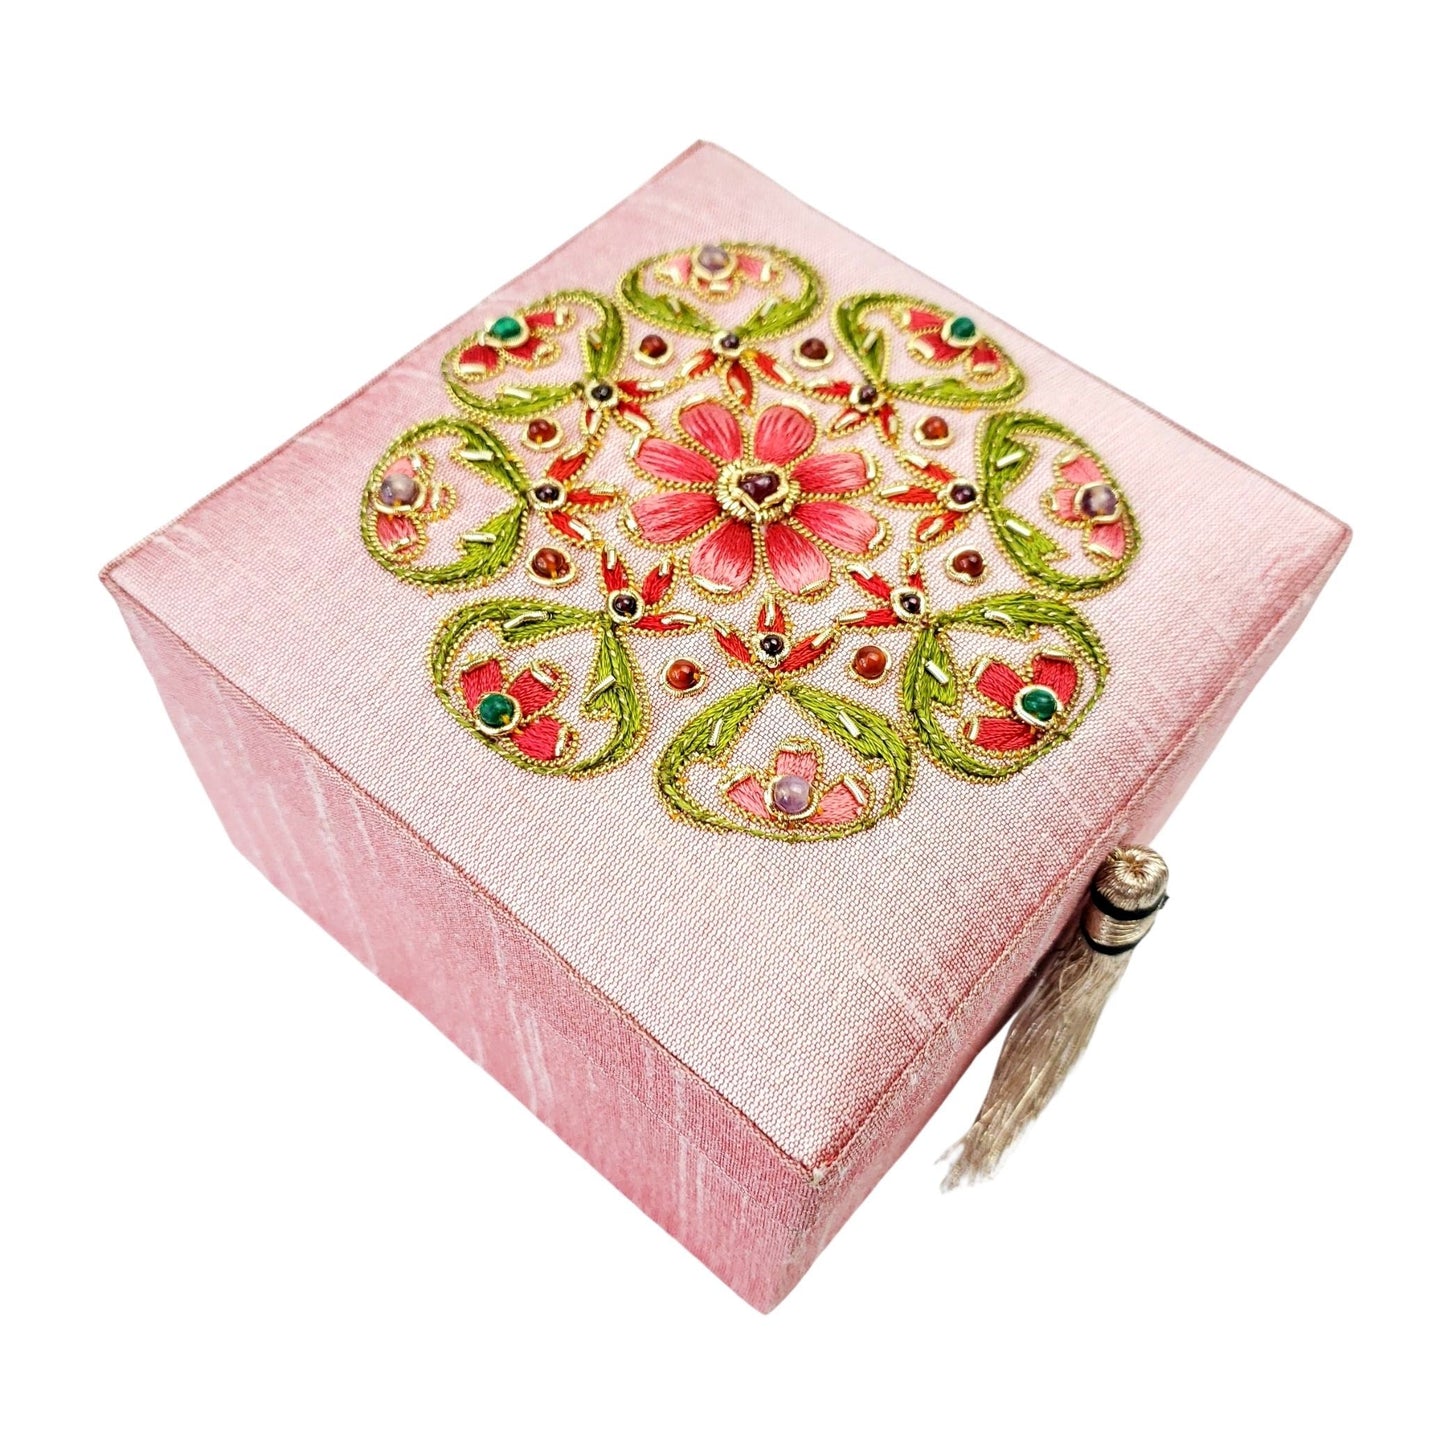 Ballerina pink jewelry box embroidered with coral colored flowers and ruby gemstones BoutiqueByMariam.